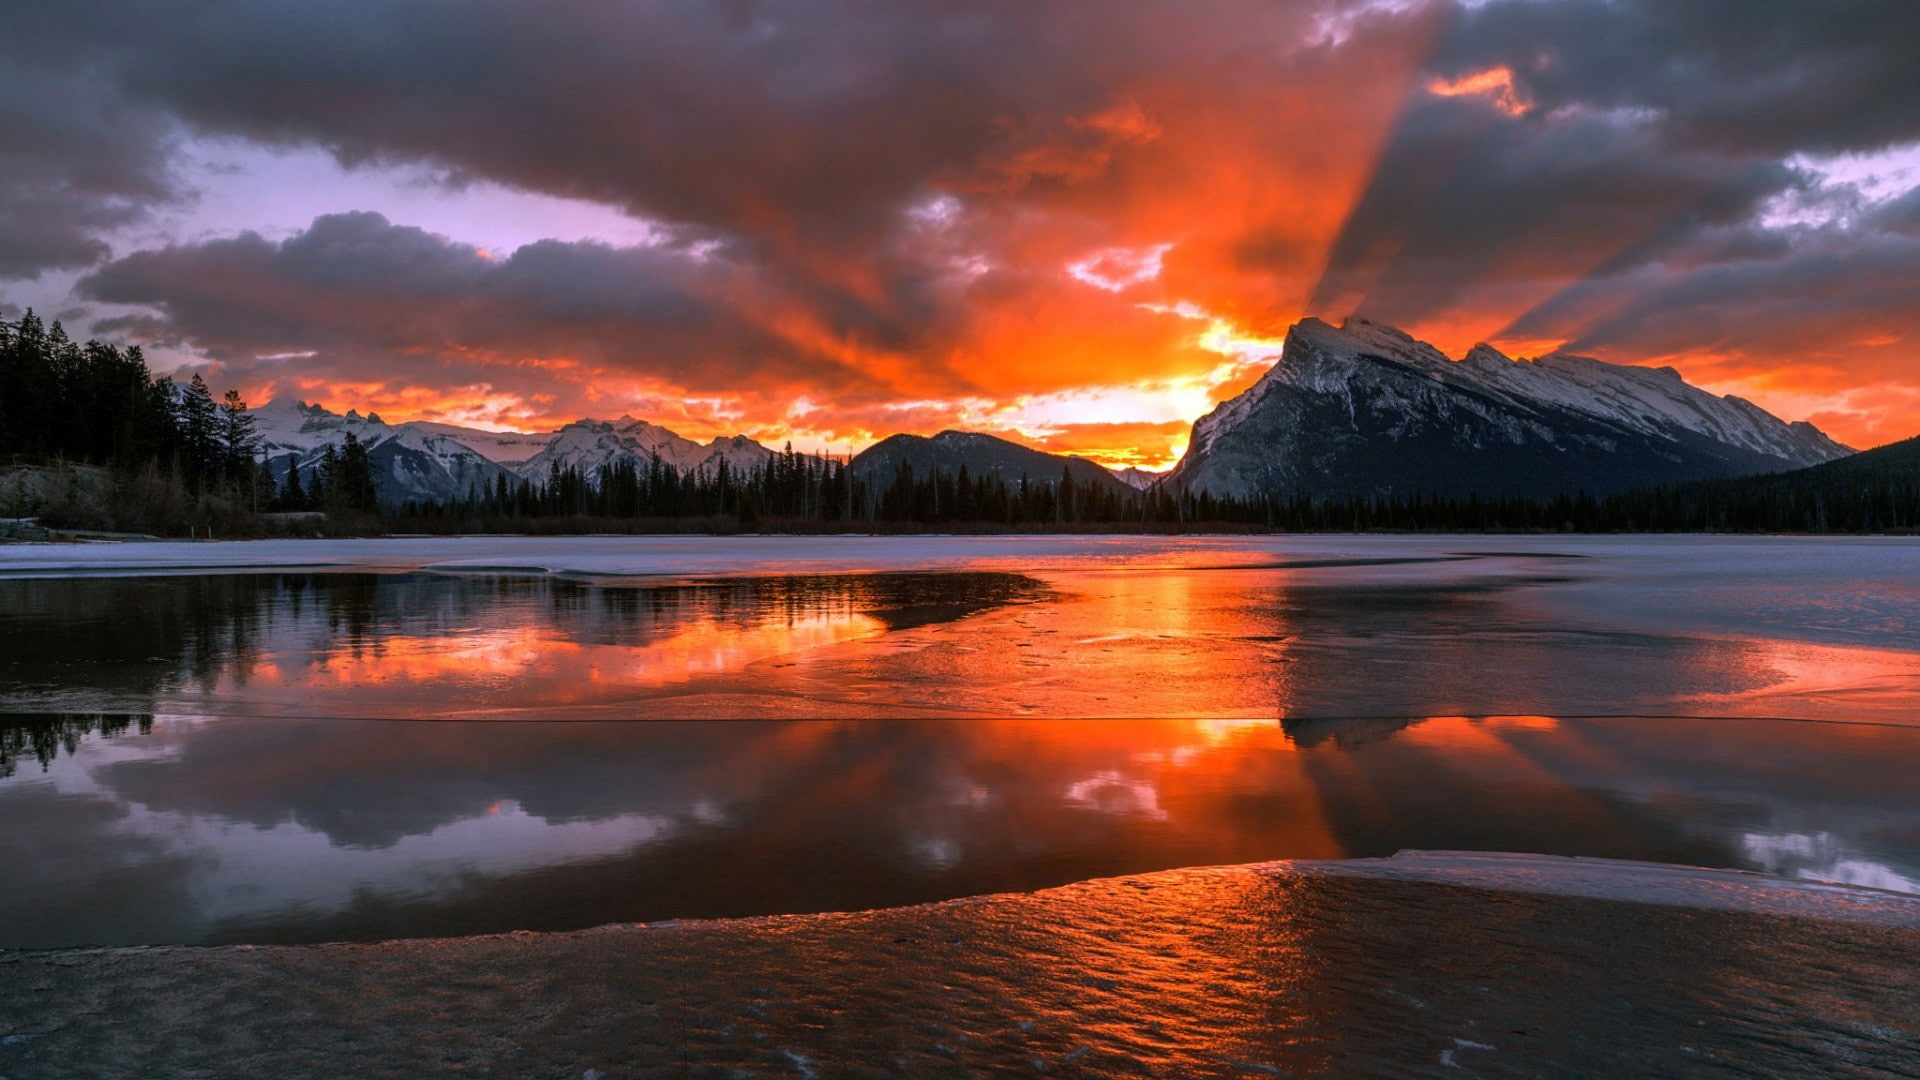 Body of water, nature, landscape, mountains, Canada, Alberta